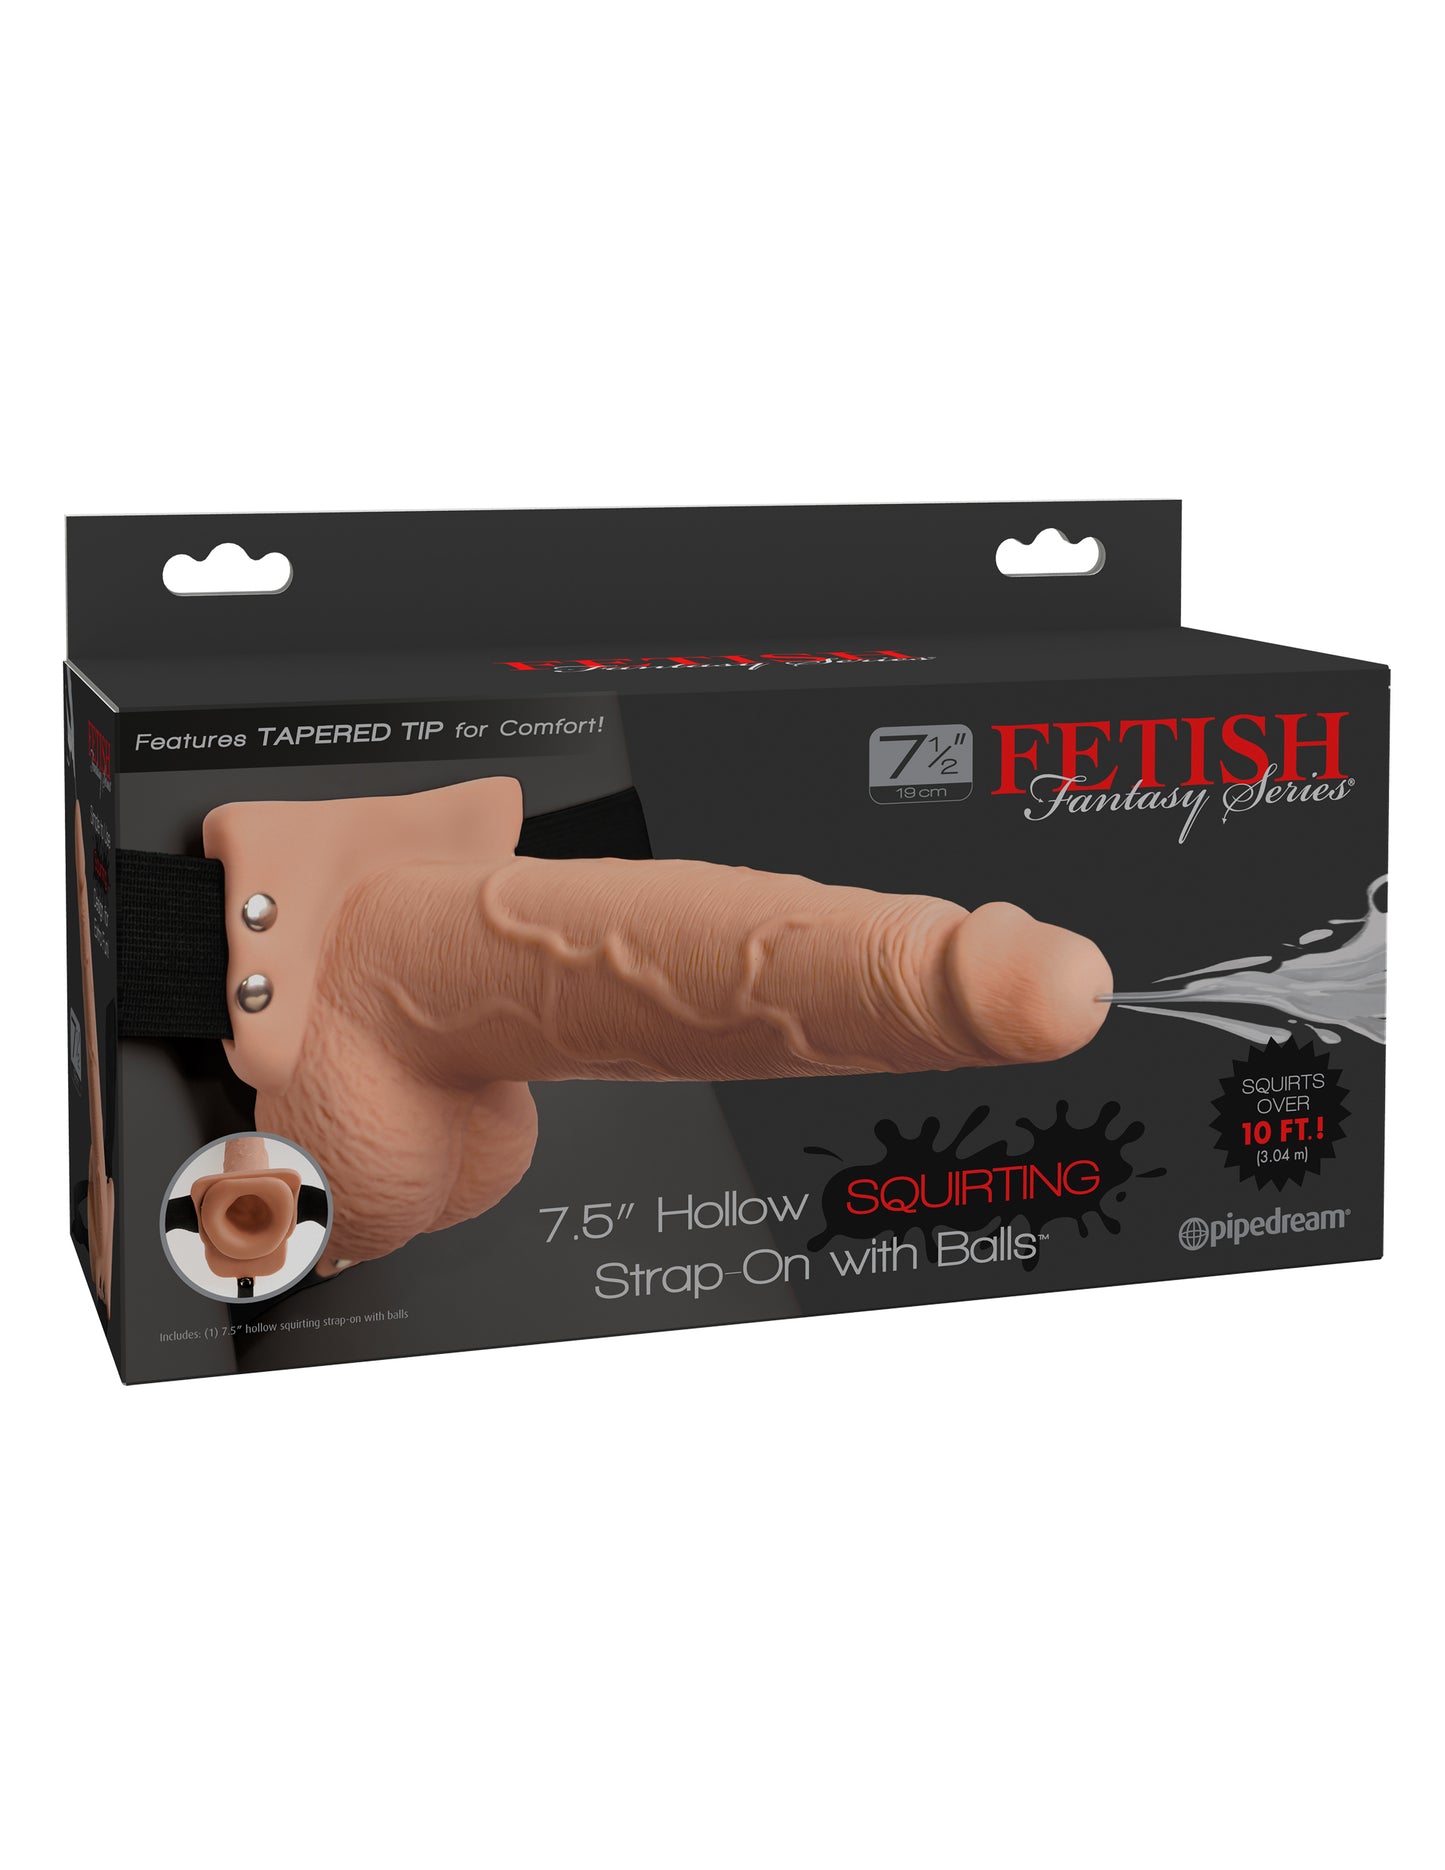 Fetish Fantasy Series 7.5 Inch Hollow Squirting Strap-on With Balls - Flesh PD3397-21